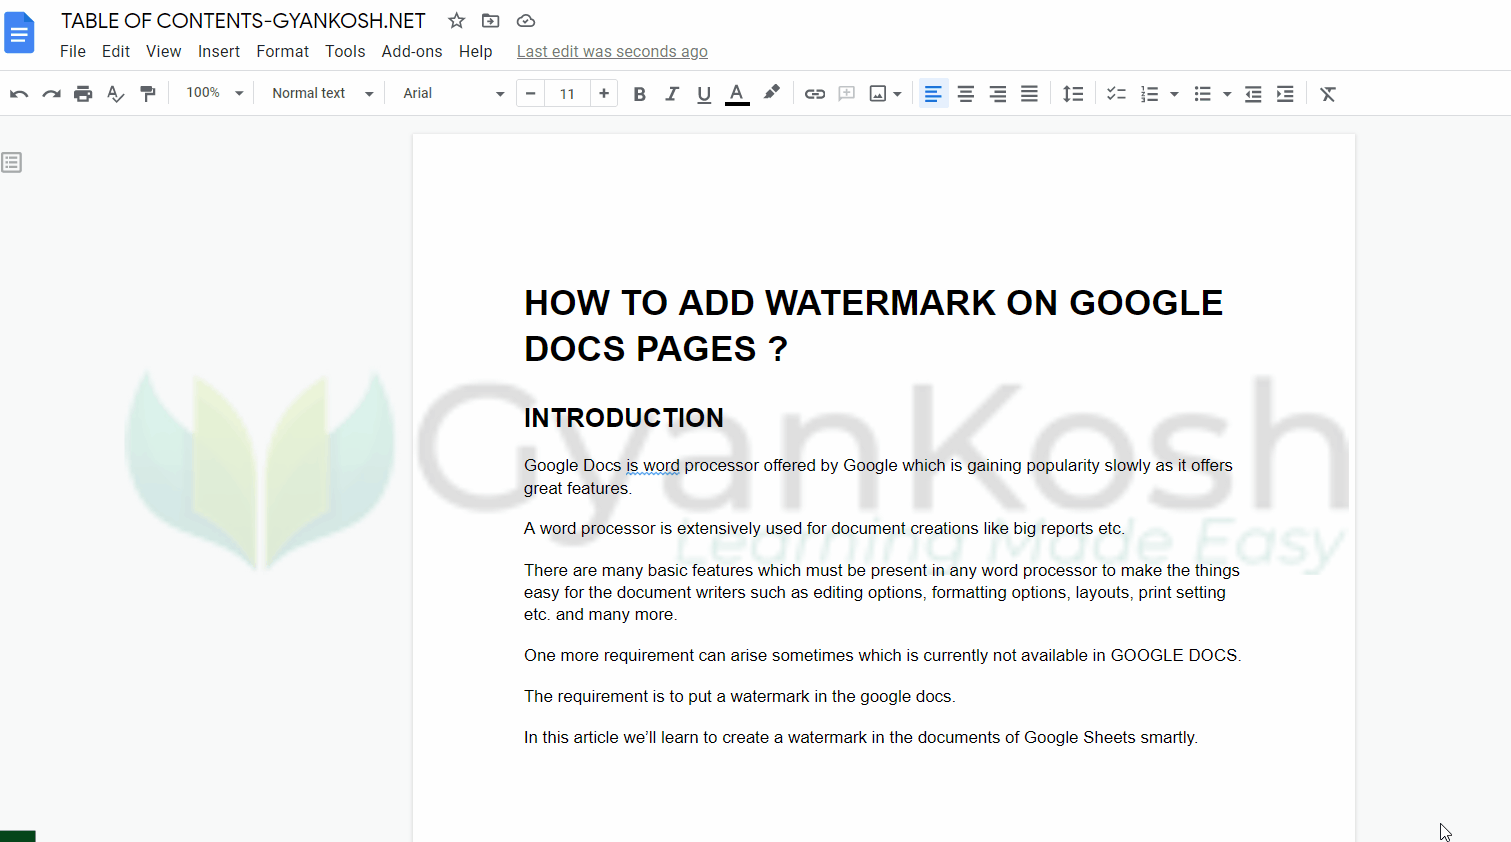 example showing a document apt for creatings table of contents in Google Docs